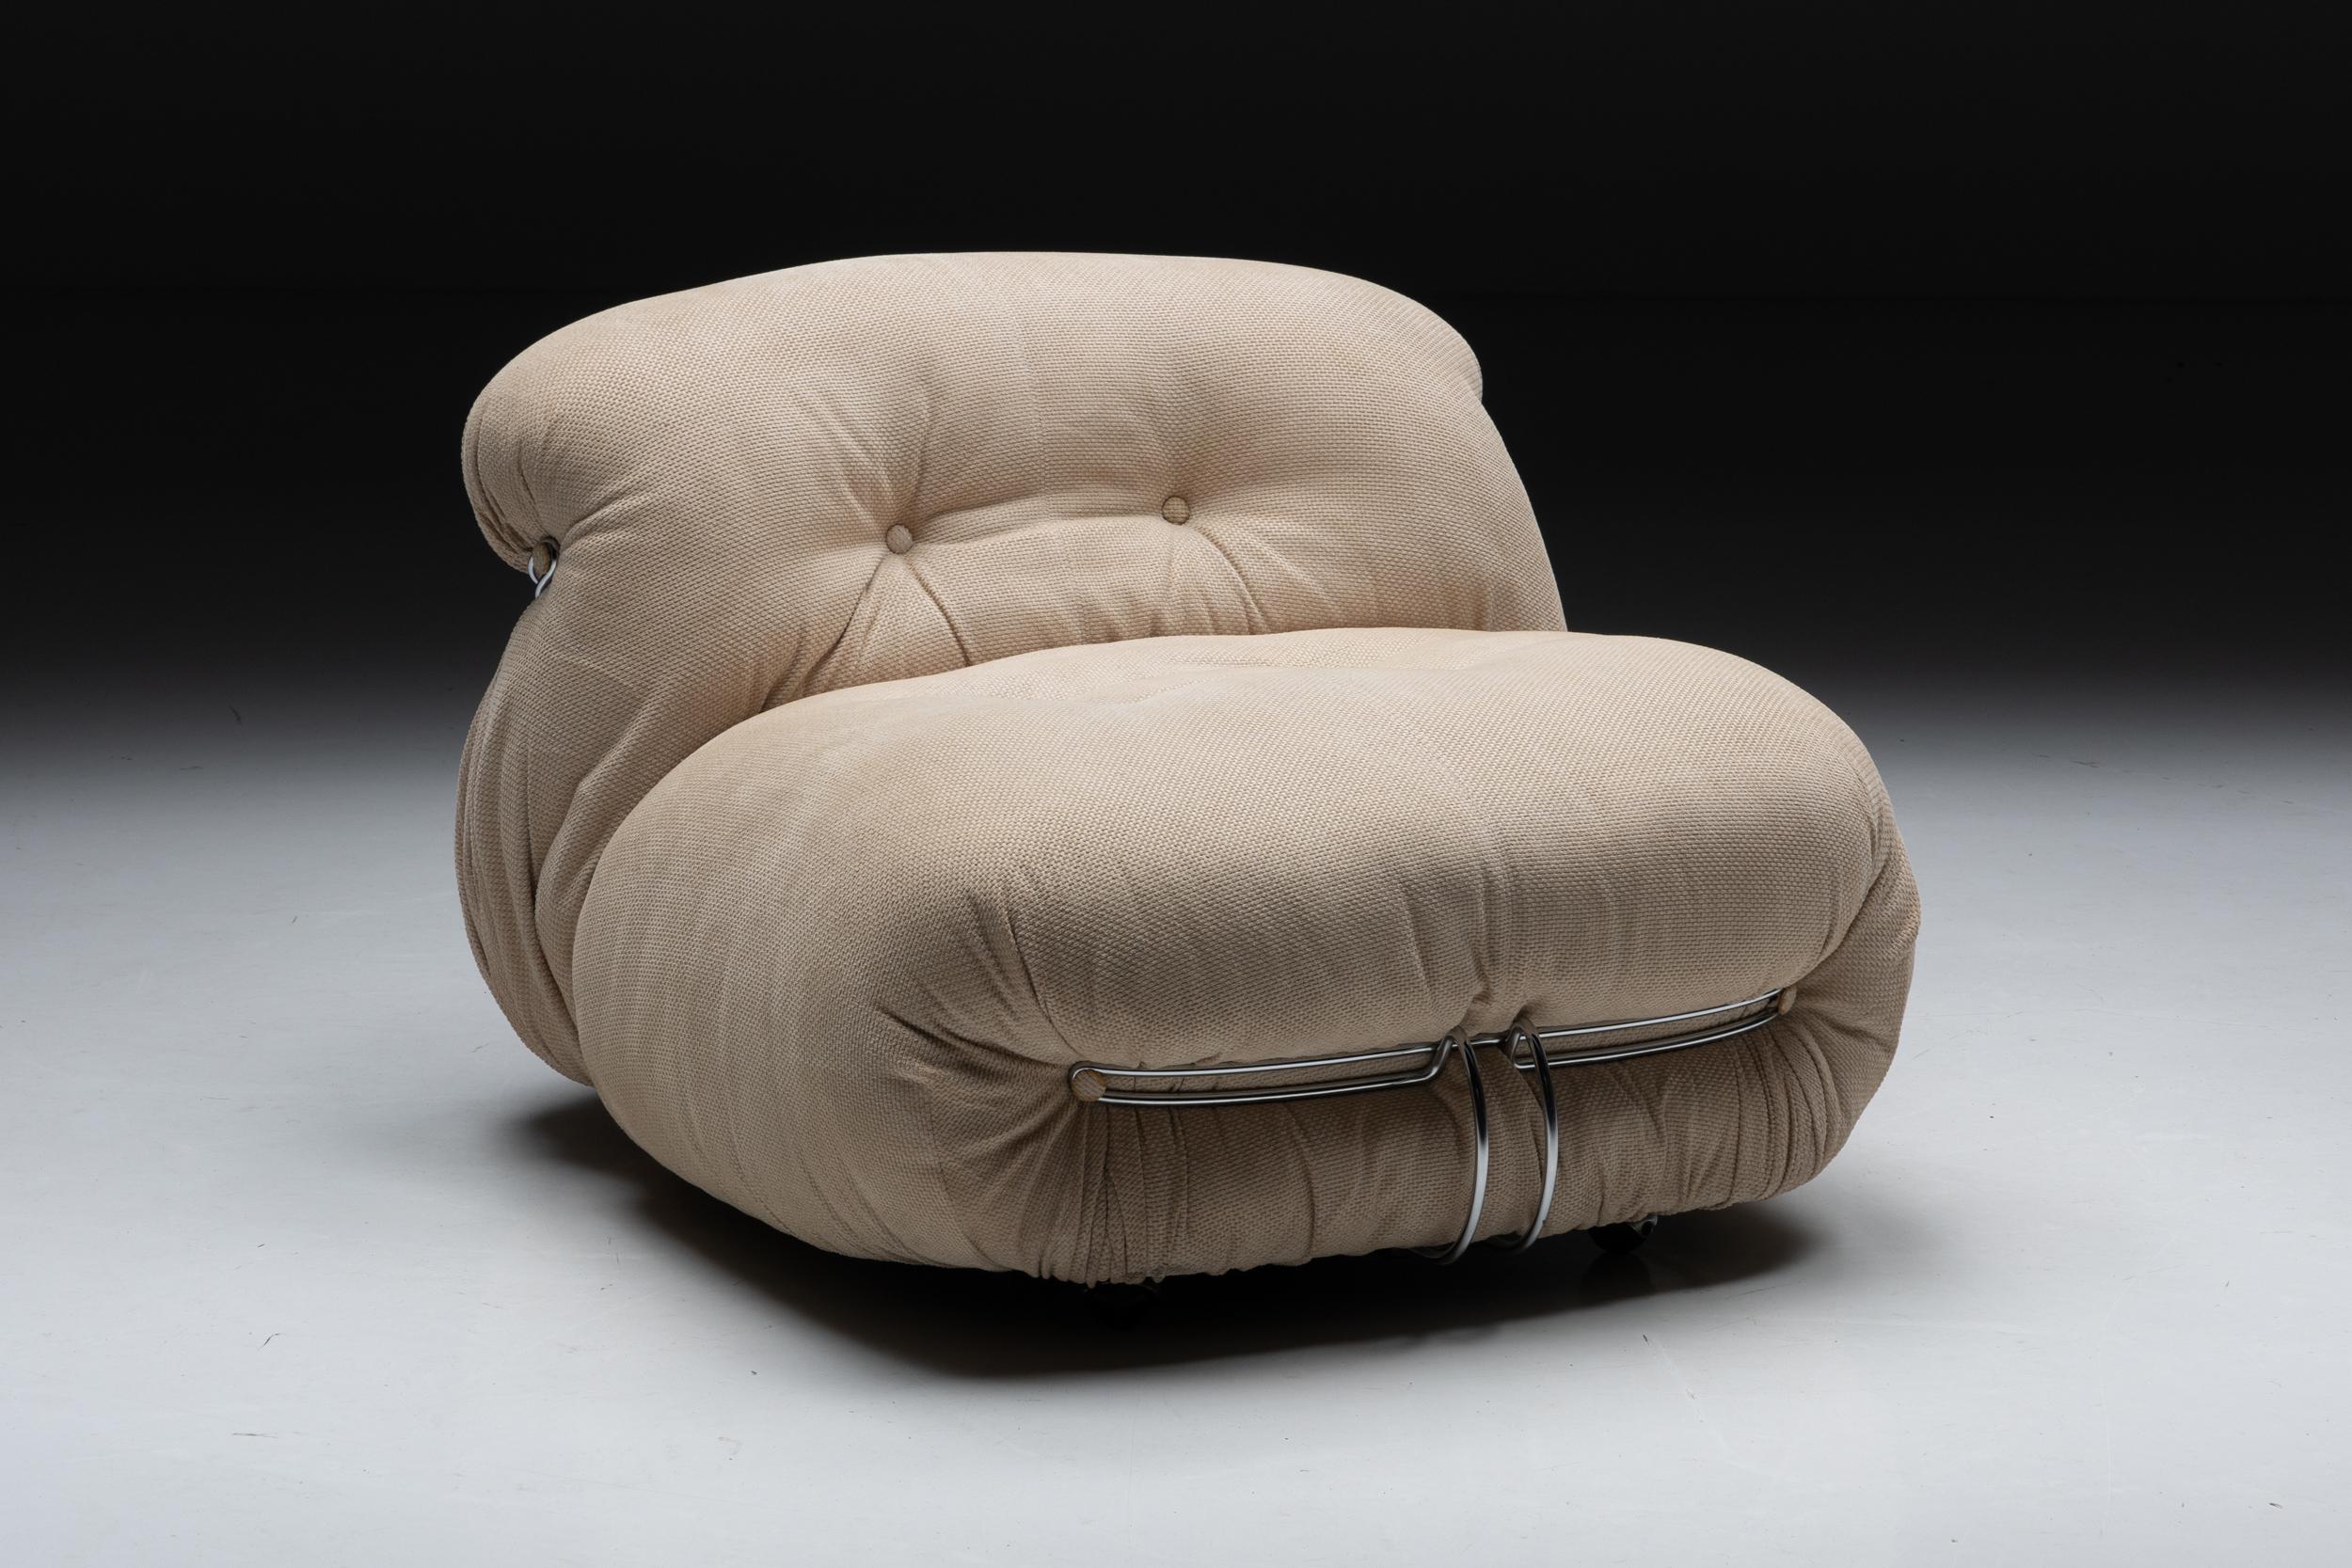 Soriana Sofa; Scarpa; Afra & Tobia Scarpa; Cassina; Italy; 1970s; Hollywood Regency; Minimalist; Italian Design; 

Afra and Tobia Scarpa Soriana lounge chair for Cassina, 1970s. The Soriana collection was meant to express beauty and comfort by